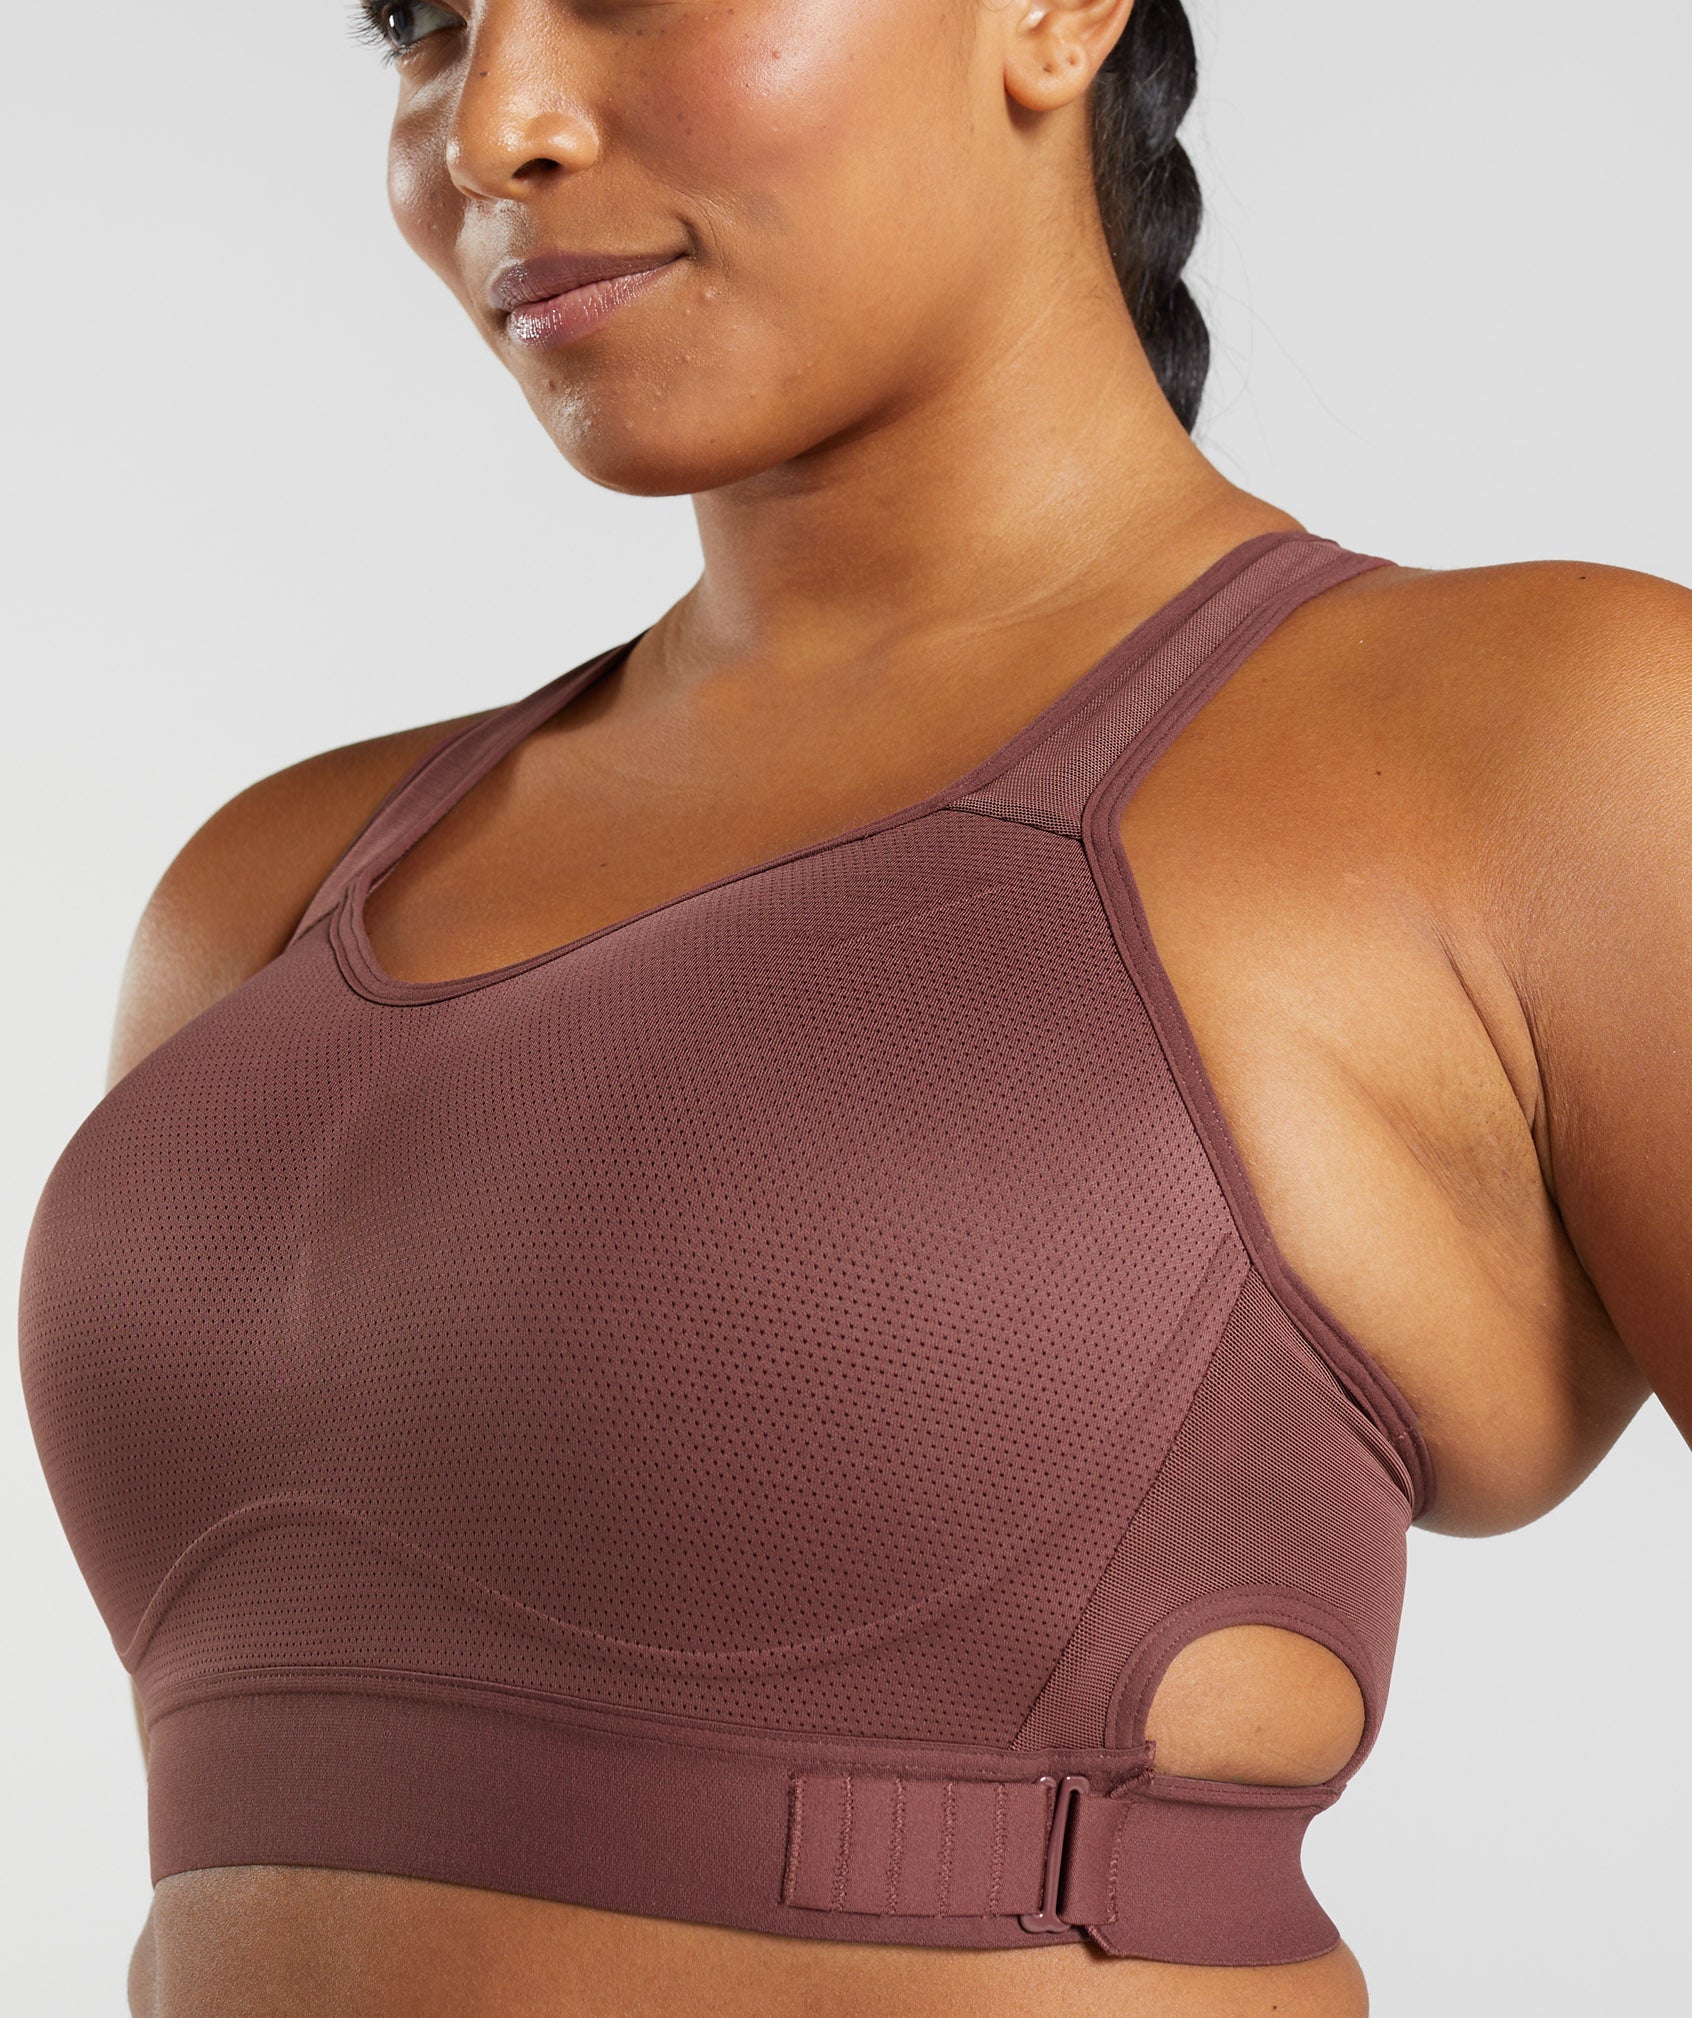 Racerback High Support Sports Bra in Cherry Brown